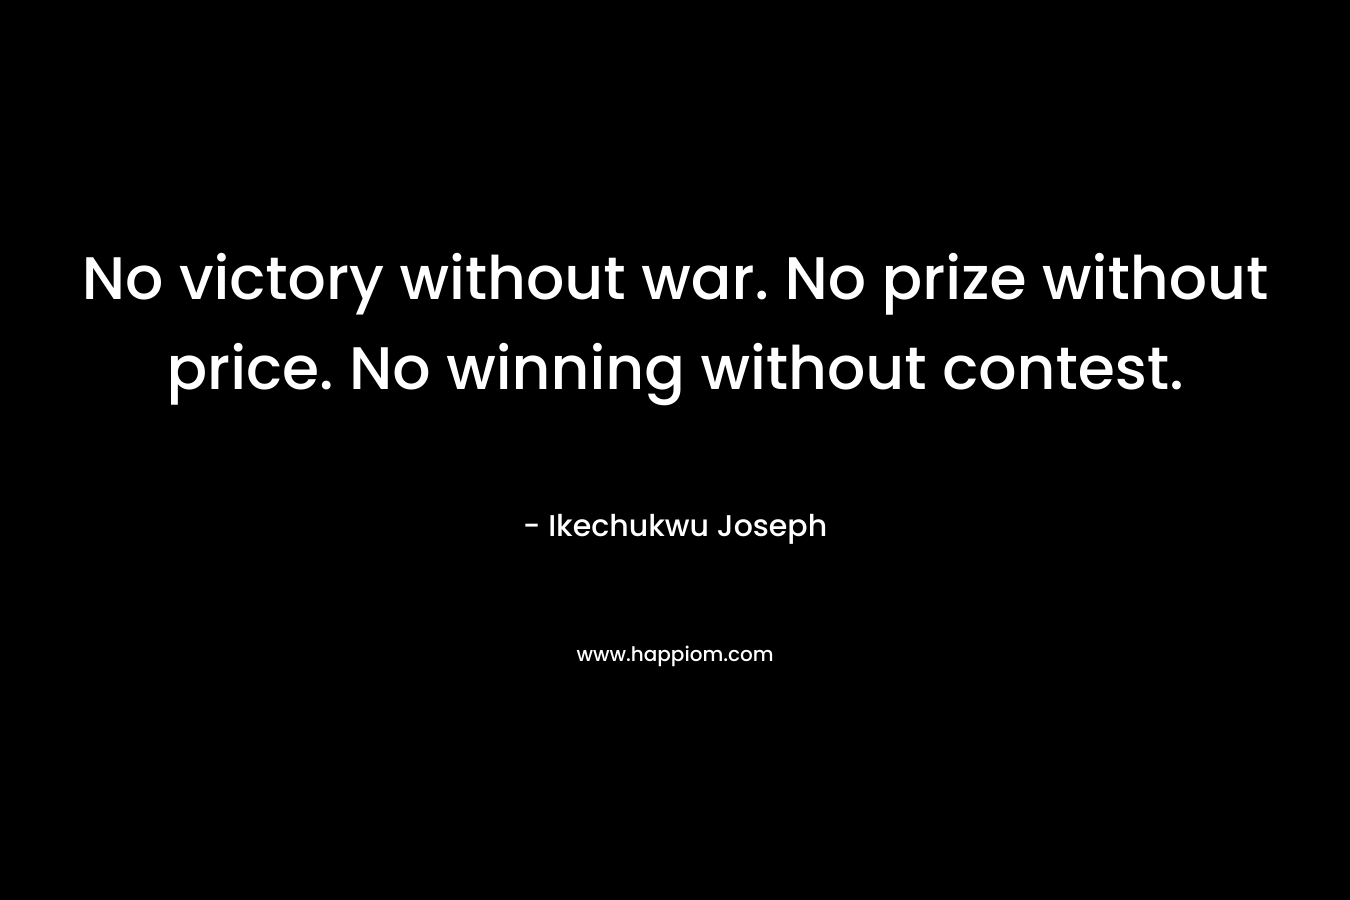 No victory without war. No prize without price. No winning without contest.